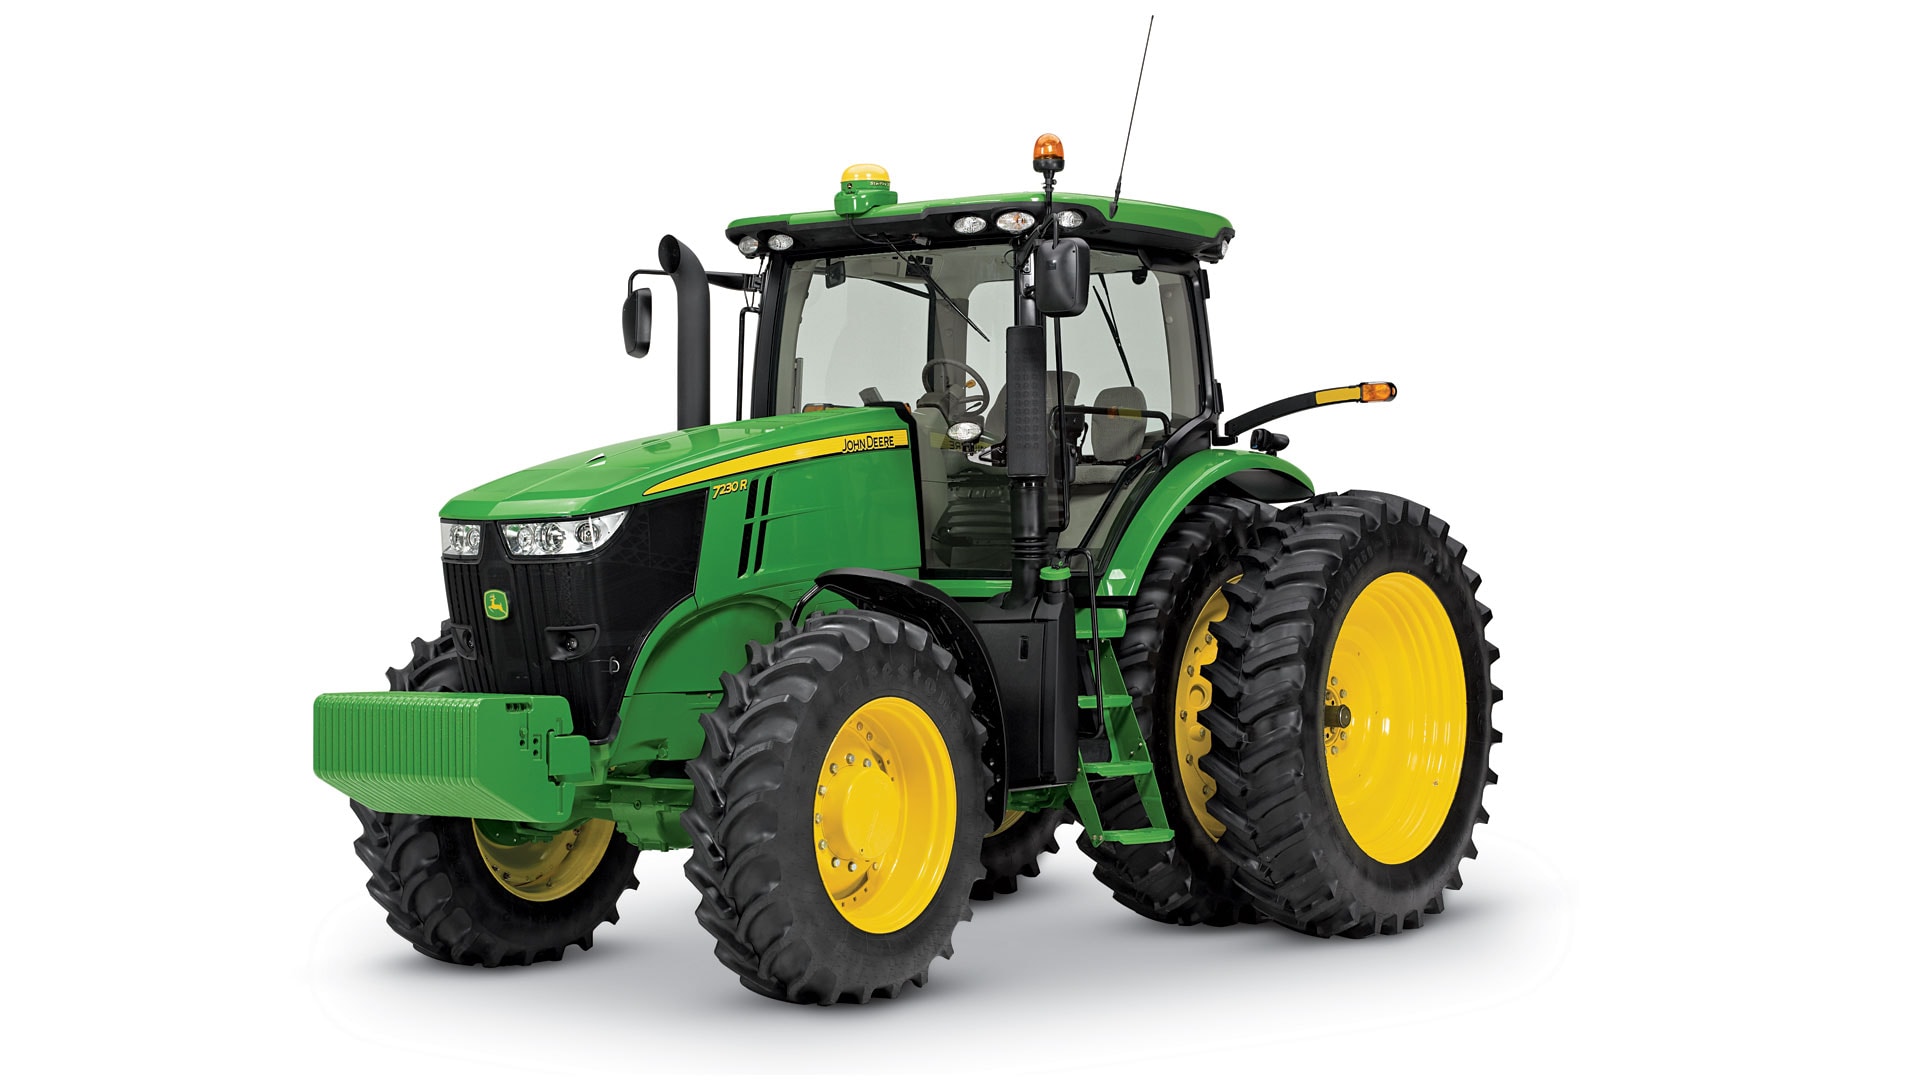 View the 7R Tractors